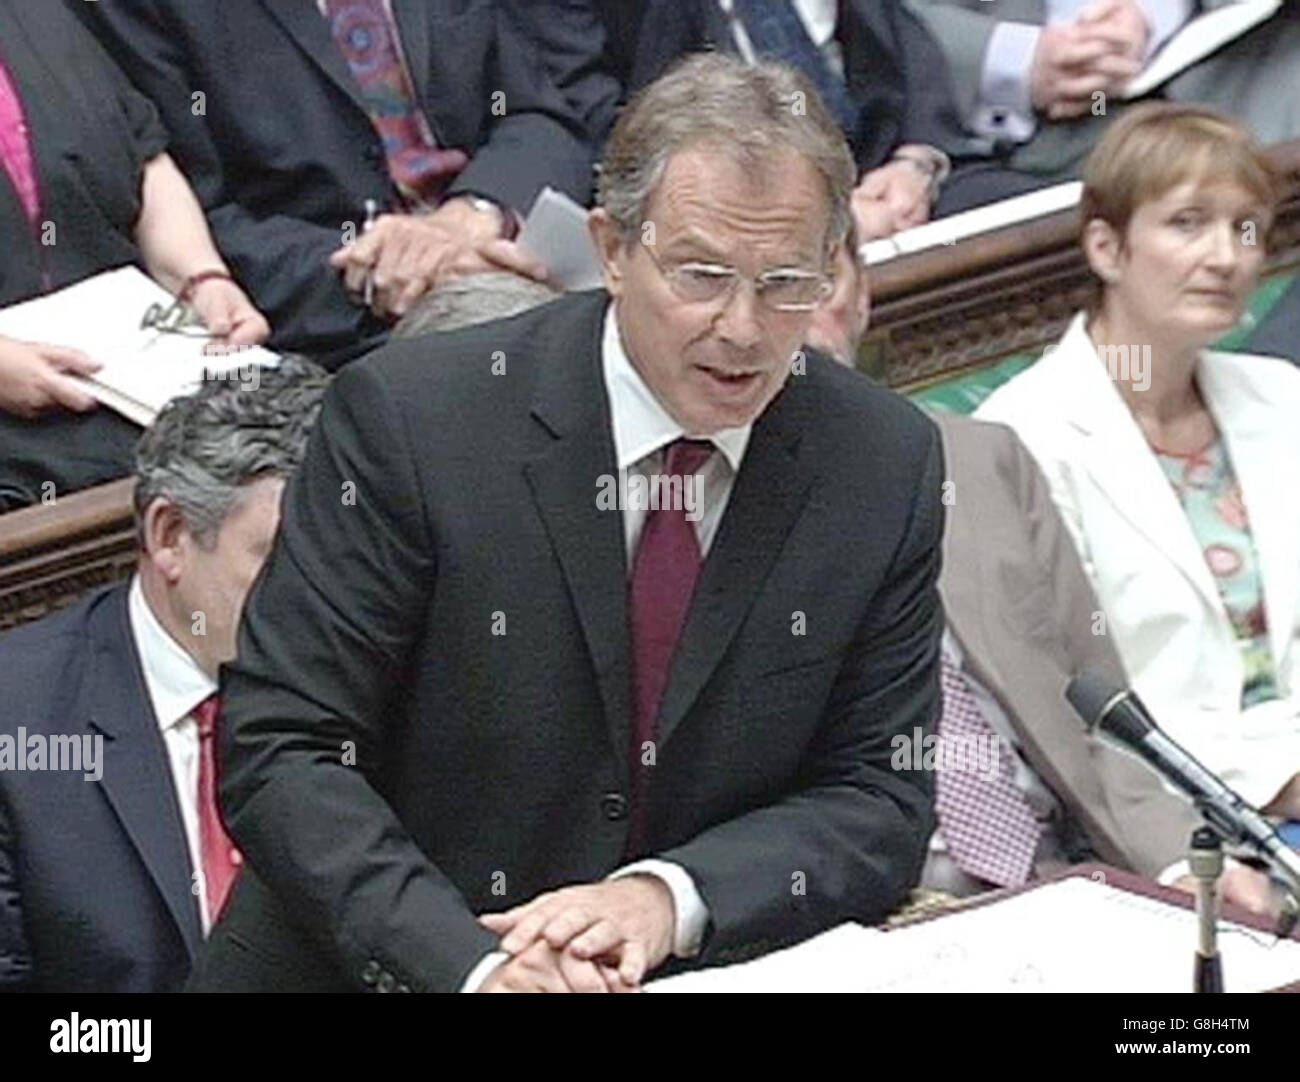 British Prime Minister Tony Blair during the weekly Prime Minister's Question Time in the House of Commons, London, Wednesday July 13, 2005. PRESS ASSOCIATION Photo. Photo credit should read: PA Stock Photo